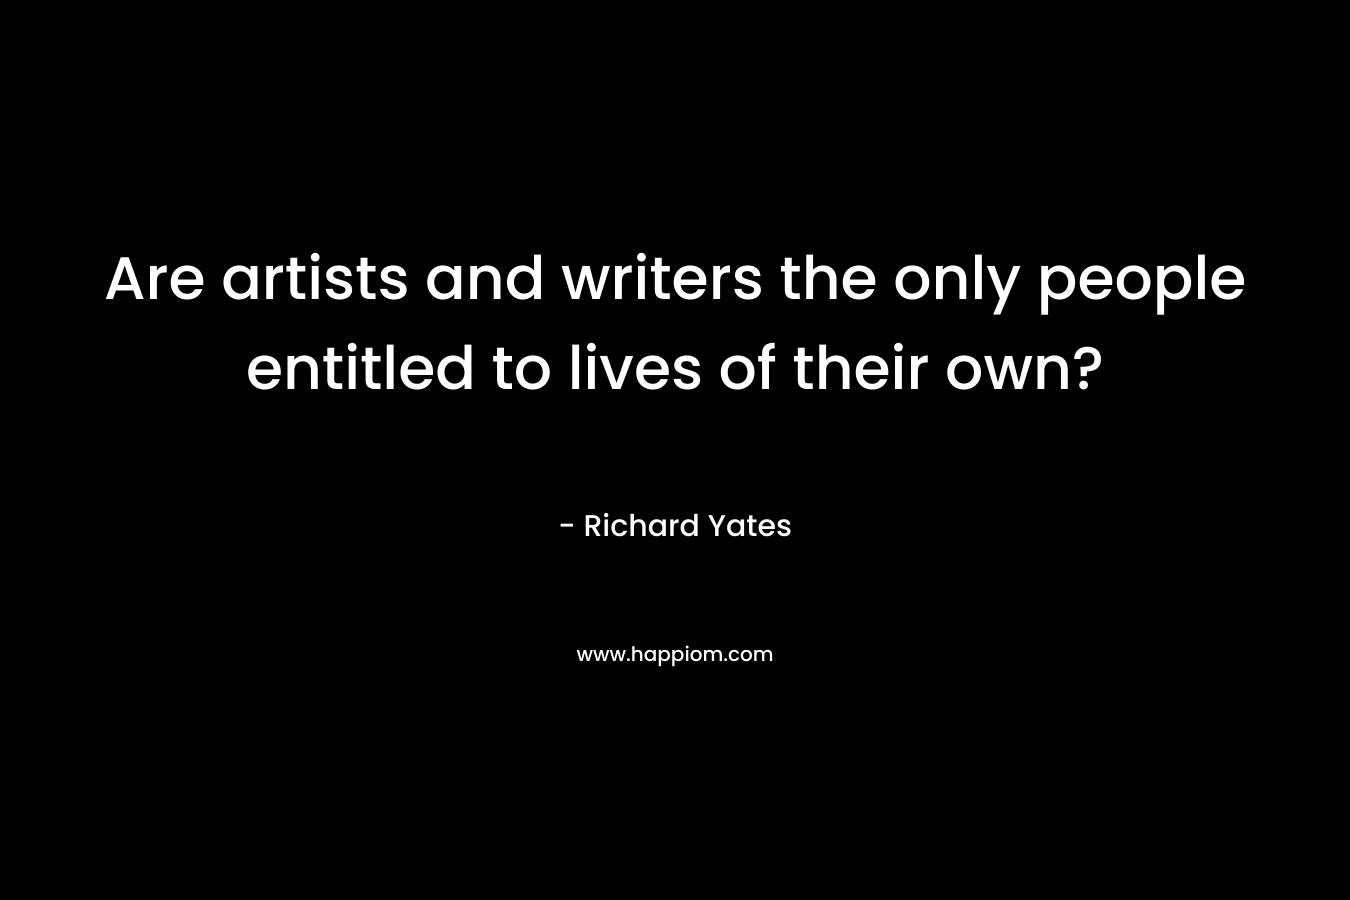 Are artists and writers the only people entitled to lives of their own?